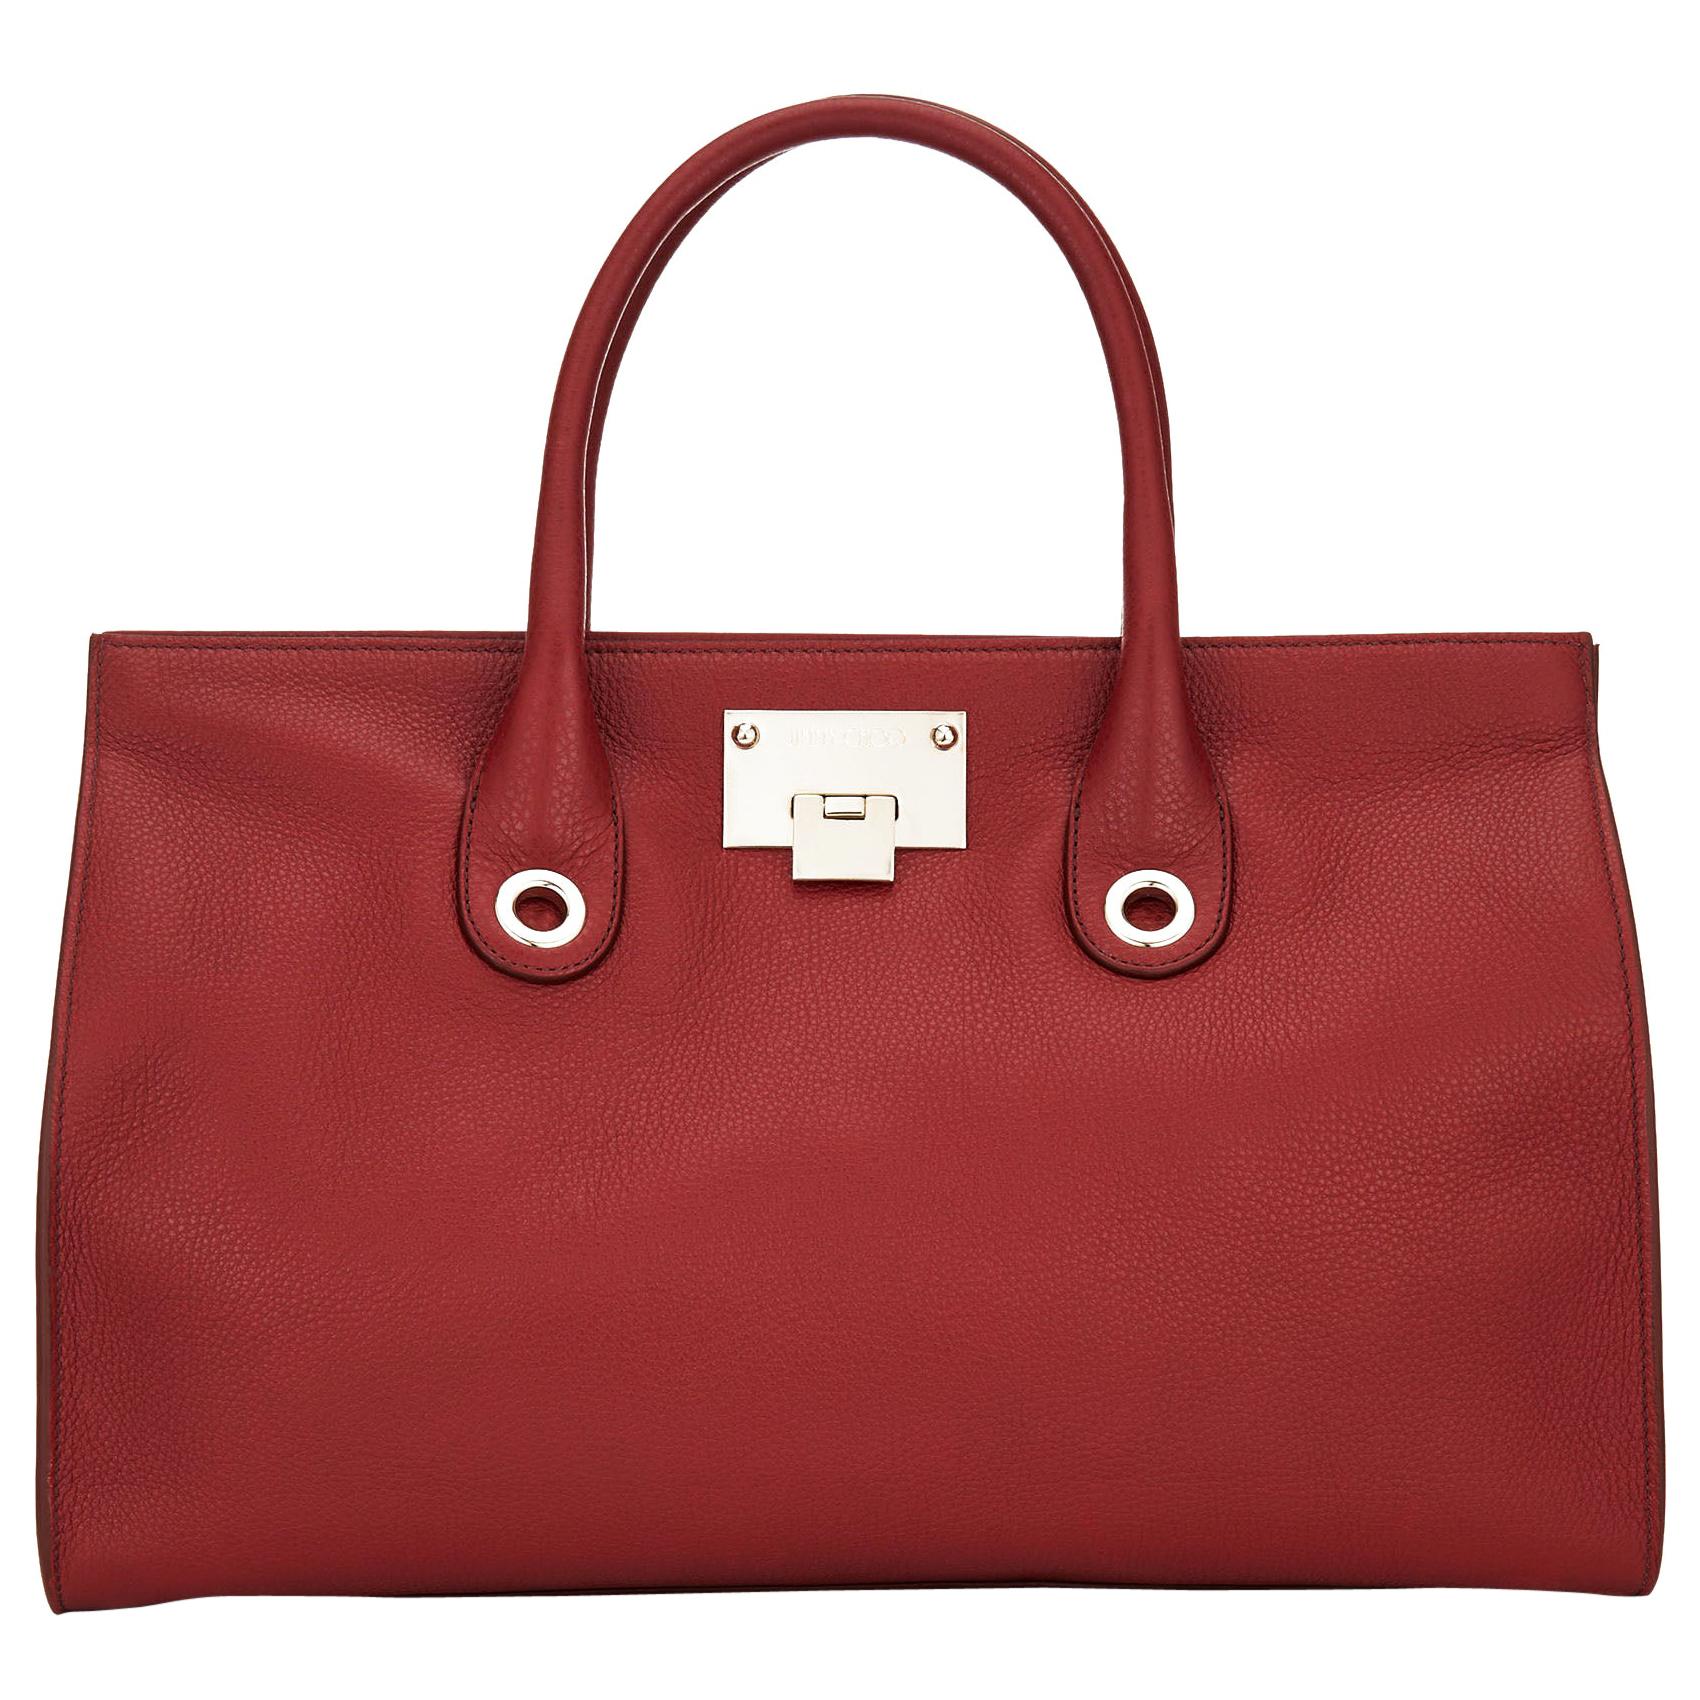 New Jimmy Choo *Riley* Red Grainy Calf Leather Tote Cross-body Large Bag For Sale